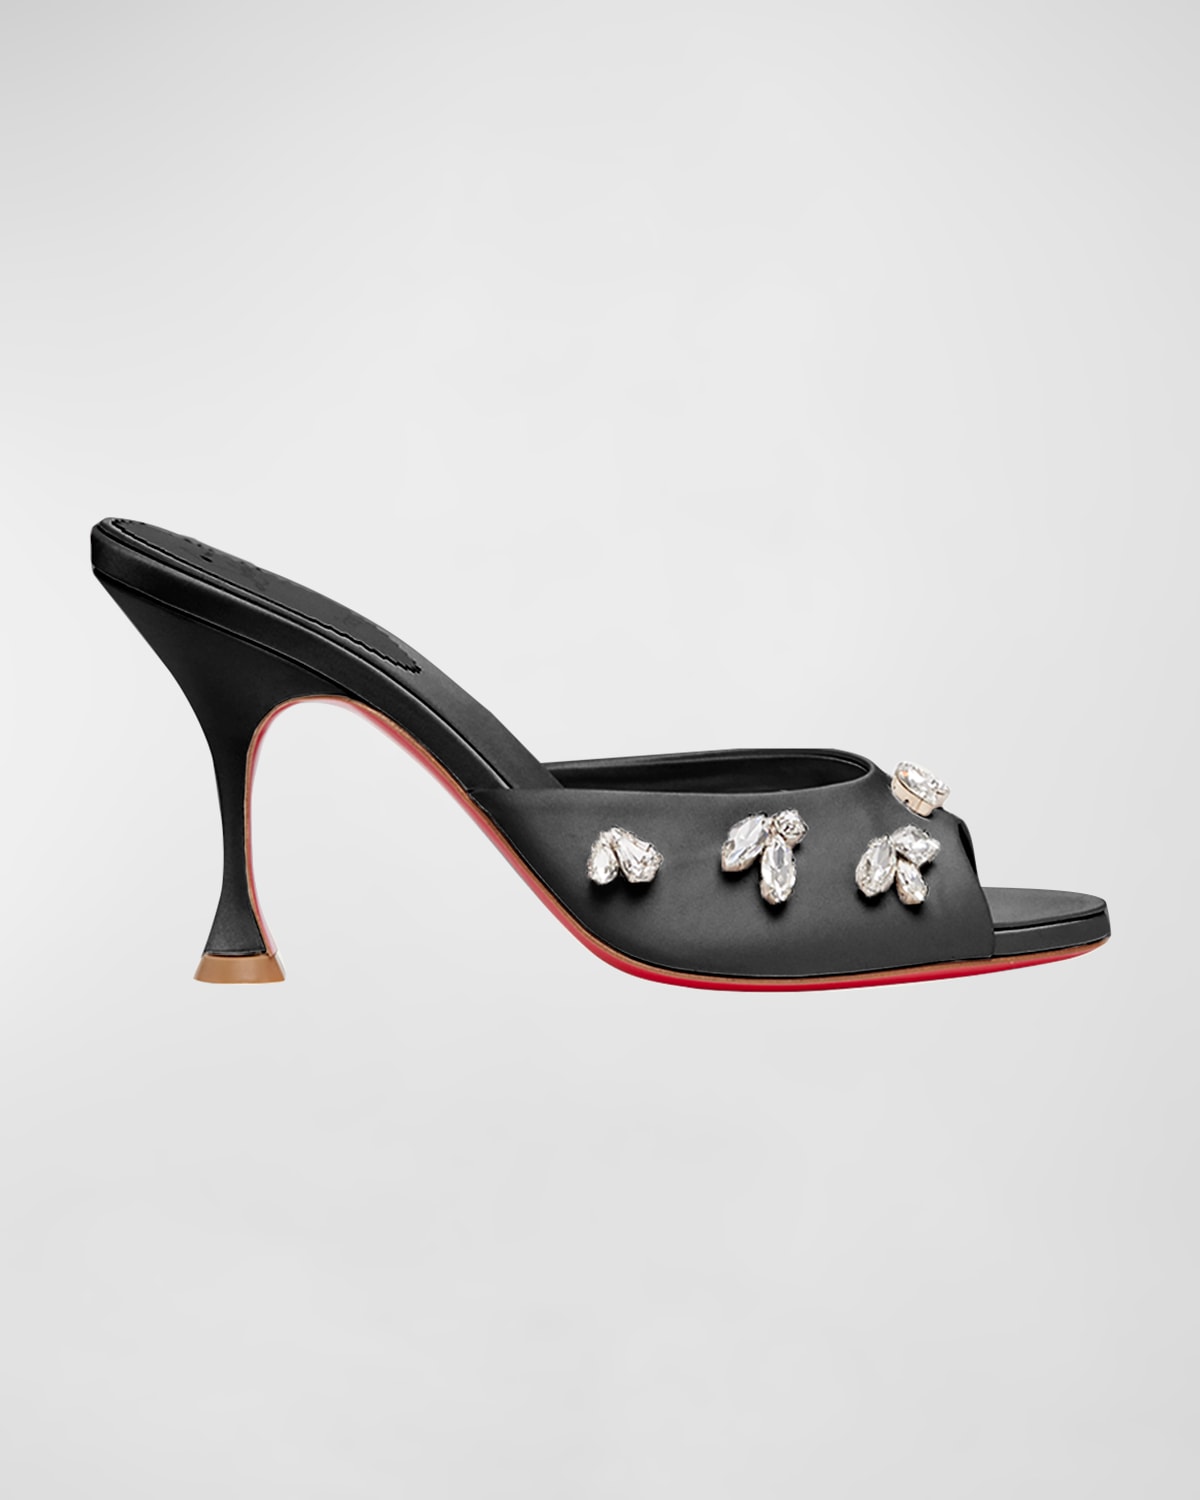 CHRISTIAN LOUBOUTIN DEGRAQUEENIE SILK EMBELLISHED RED SOLE SANDALS